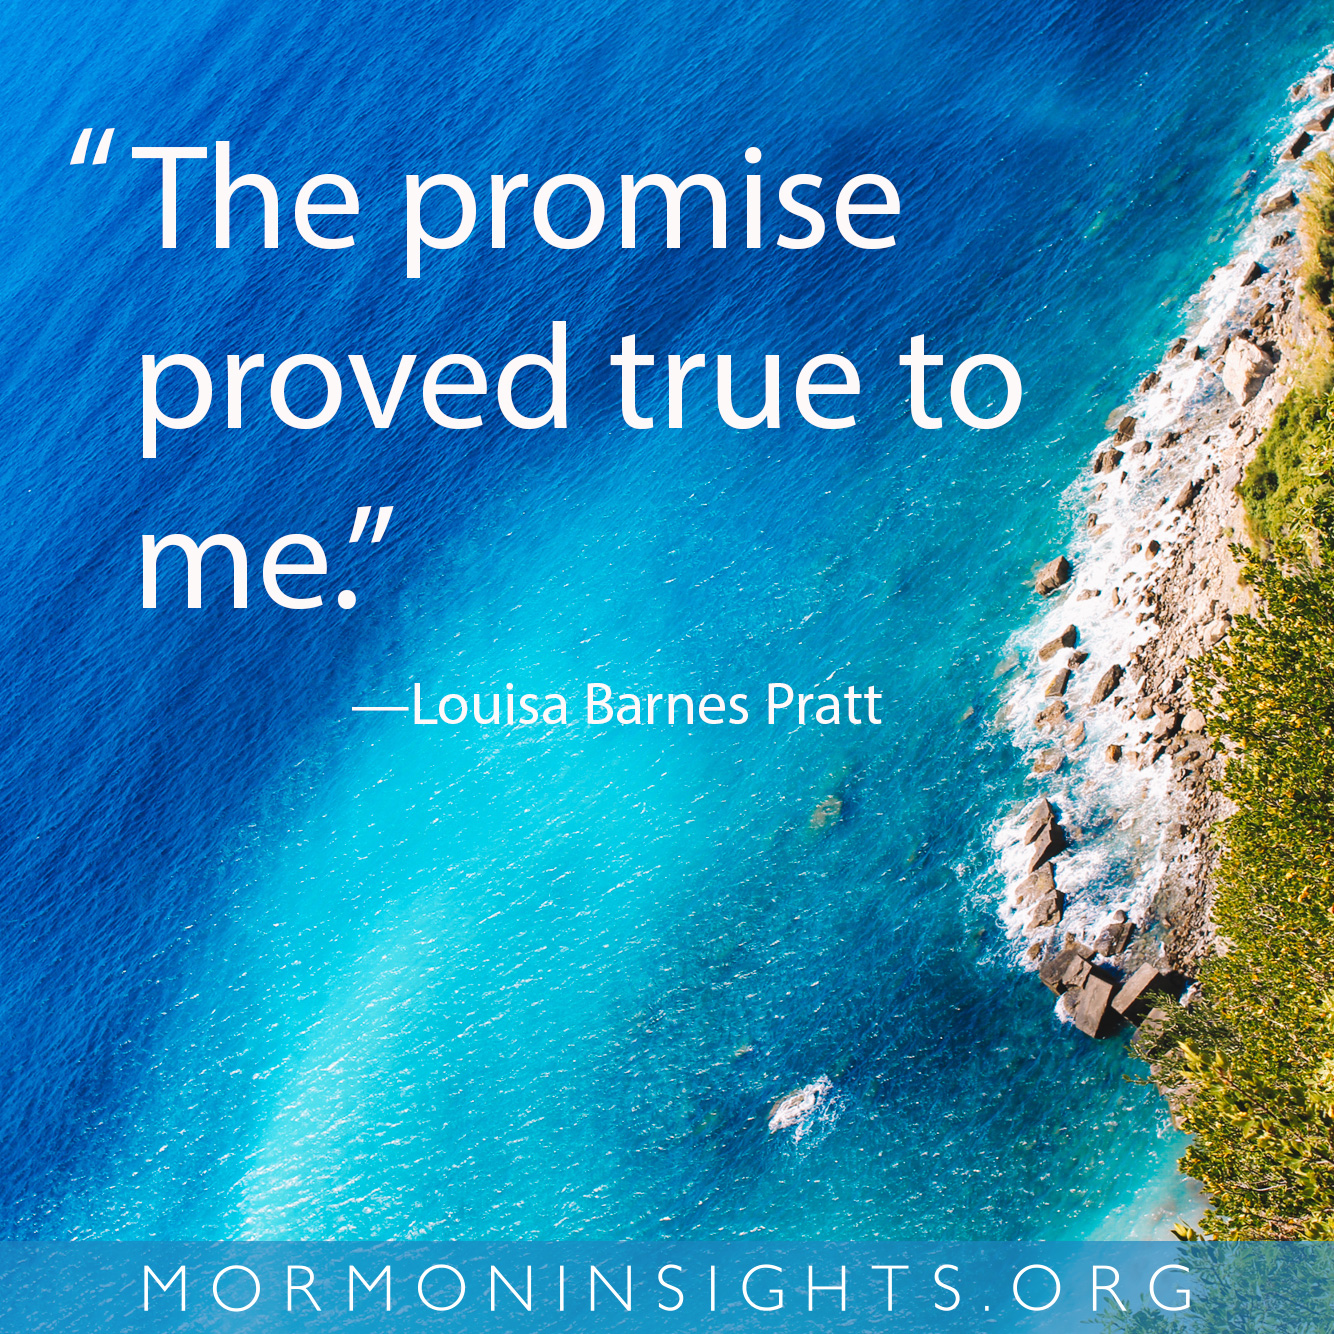 "The promise proved true to me." -Louisa Barnes Pratt. ocean view from above